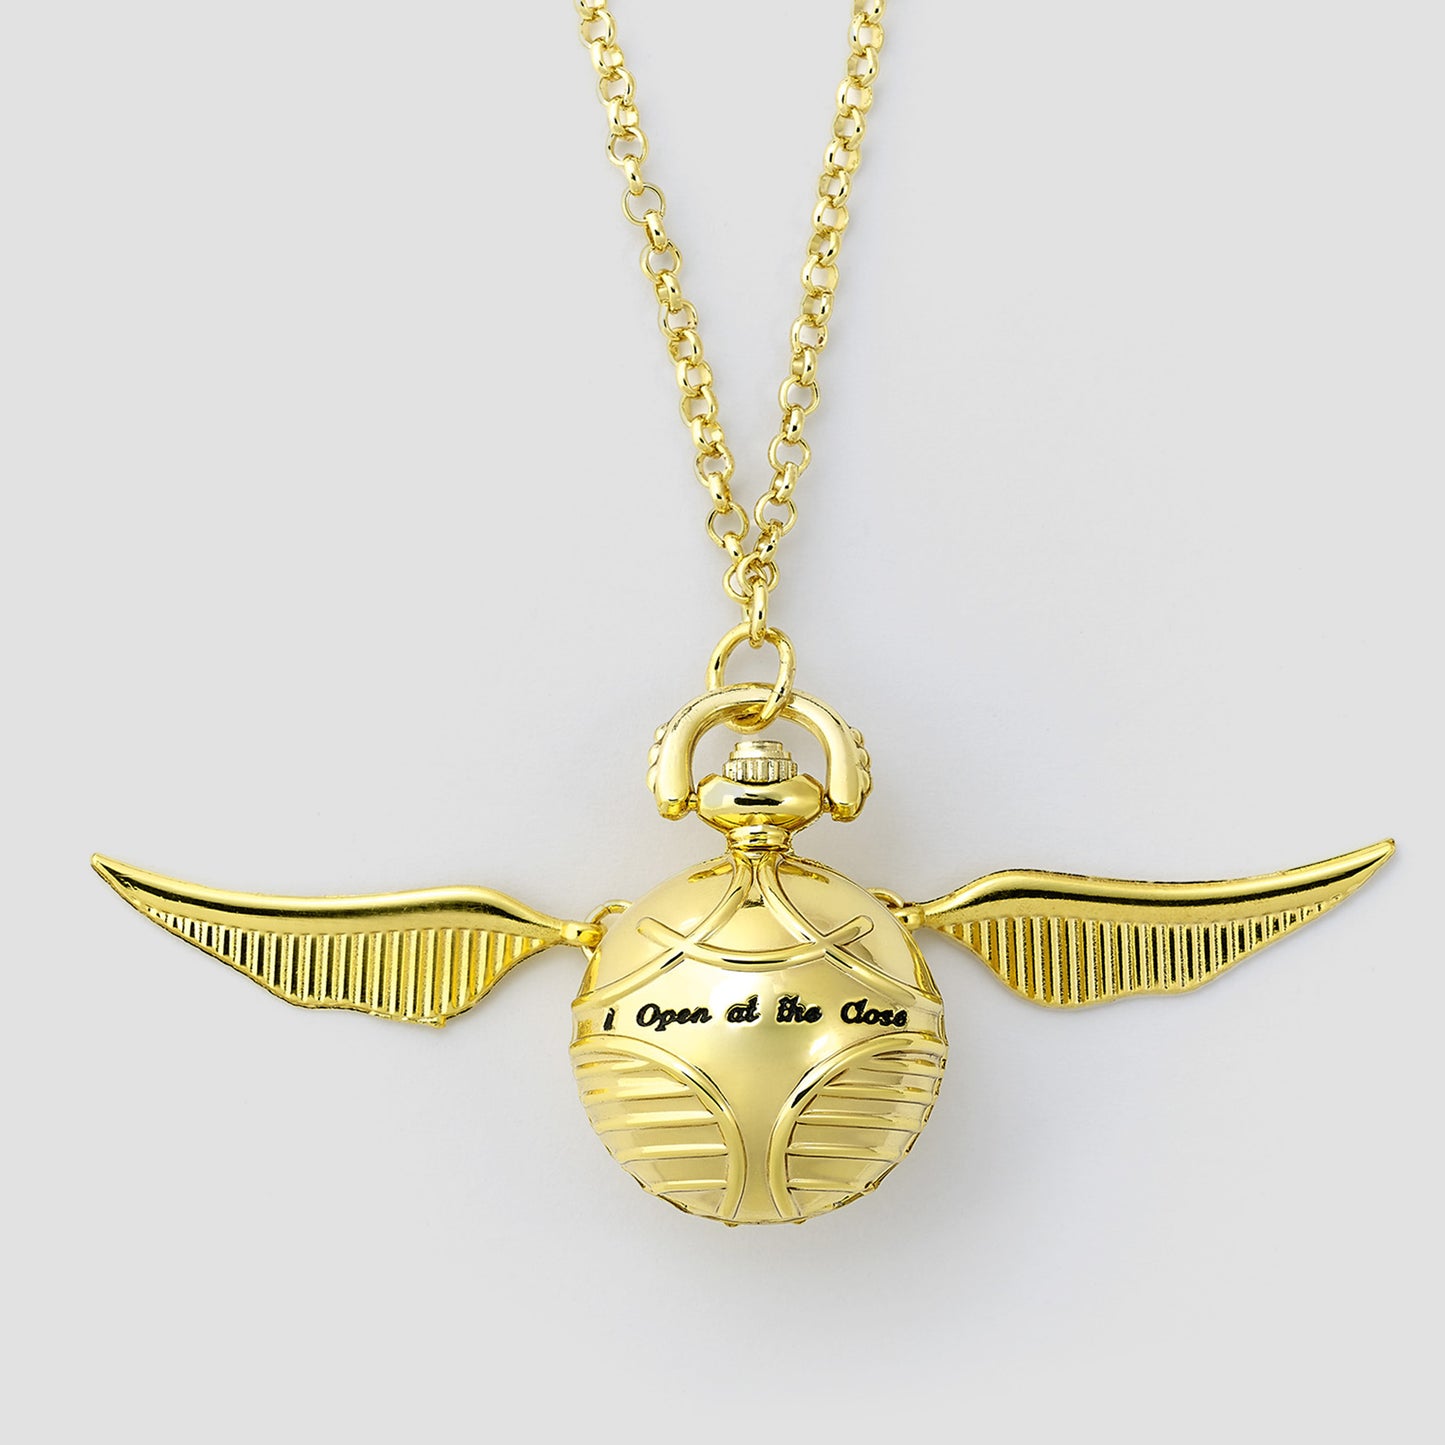 Golden Snitch (Harry Potter) Watch Necklace